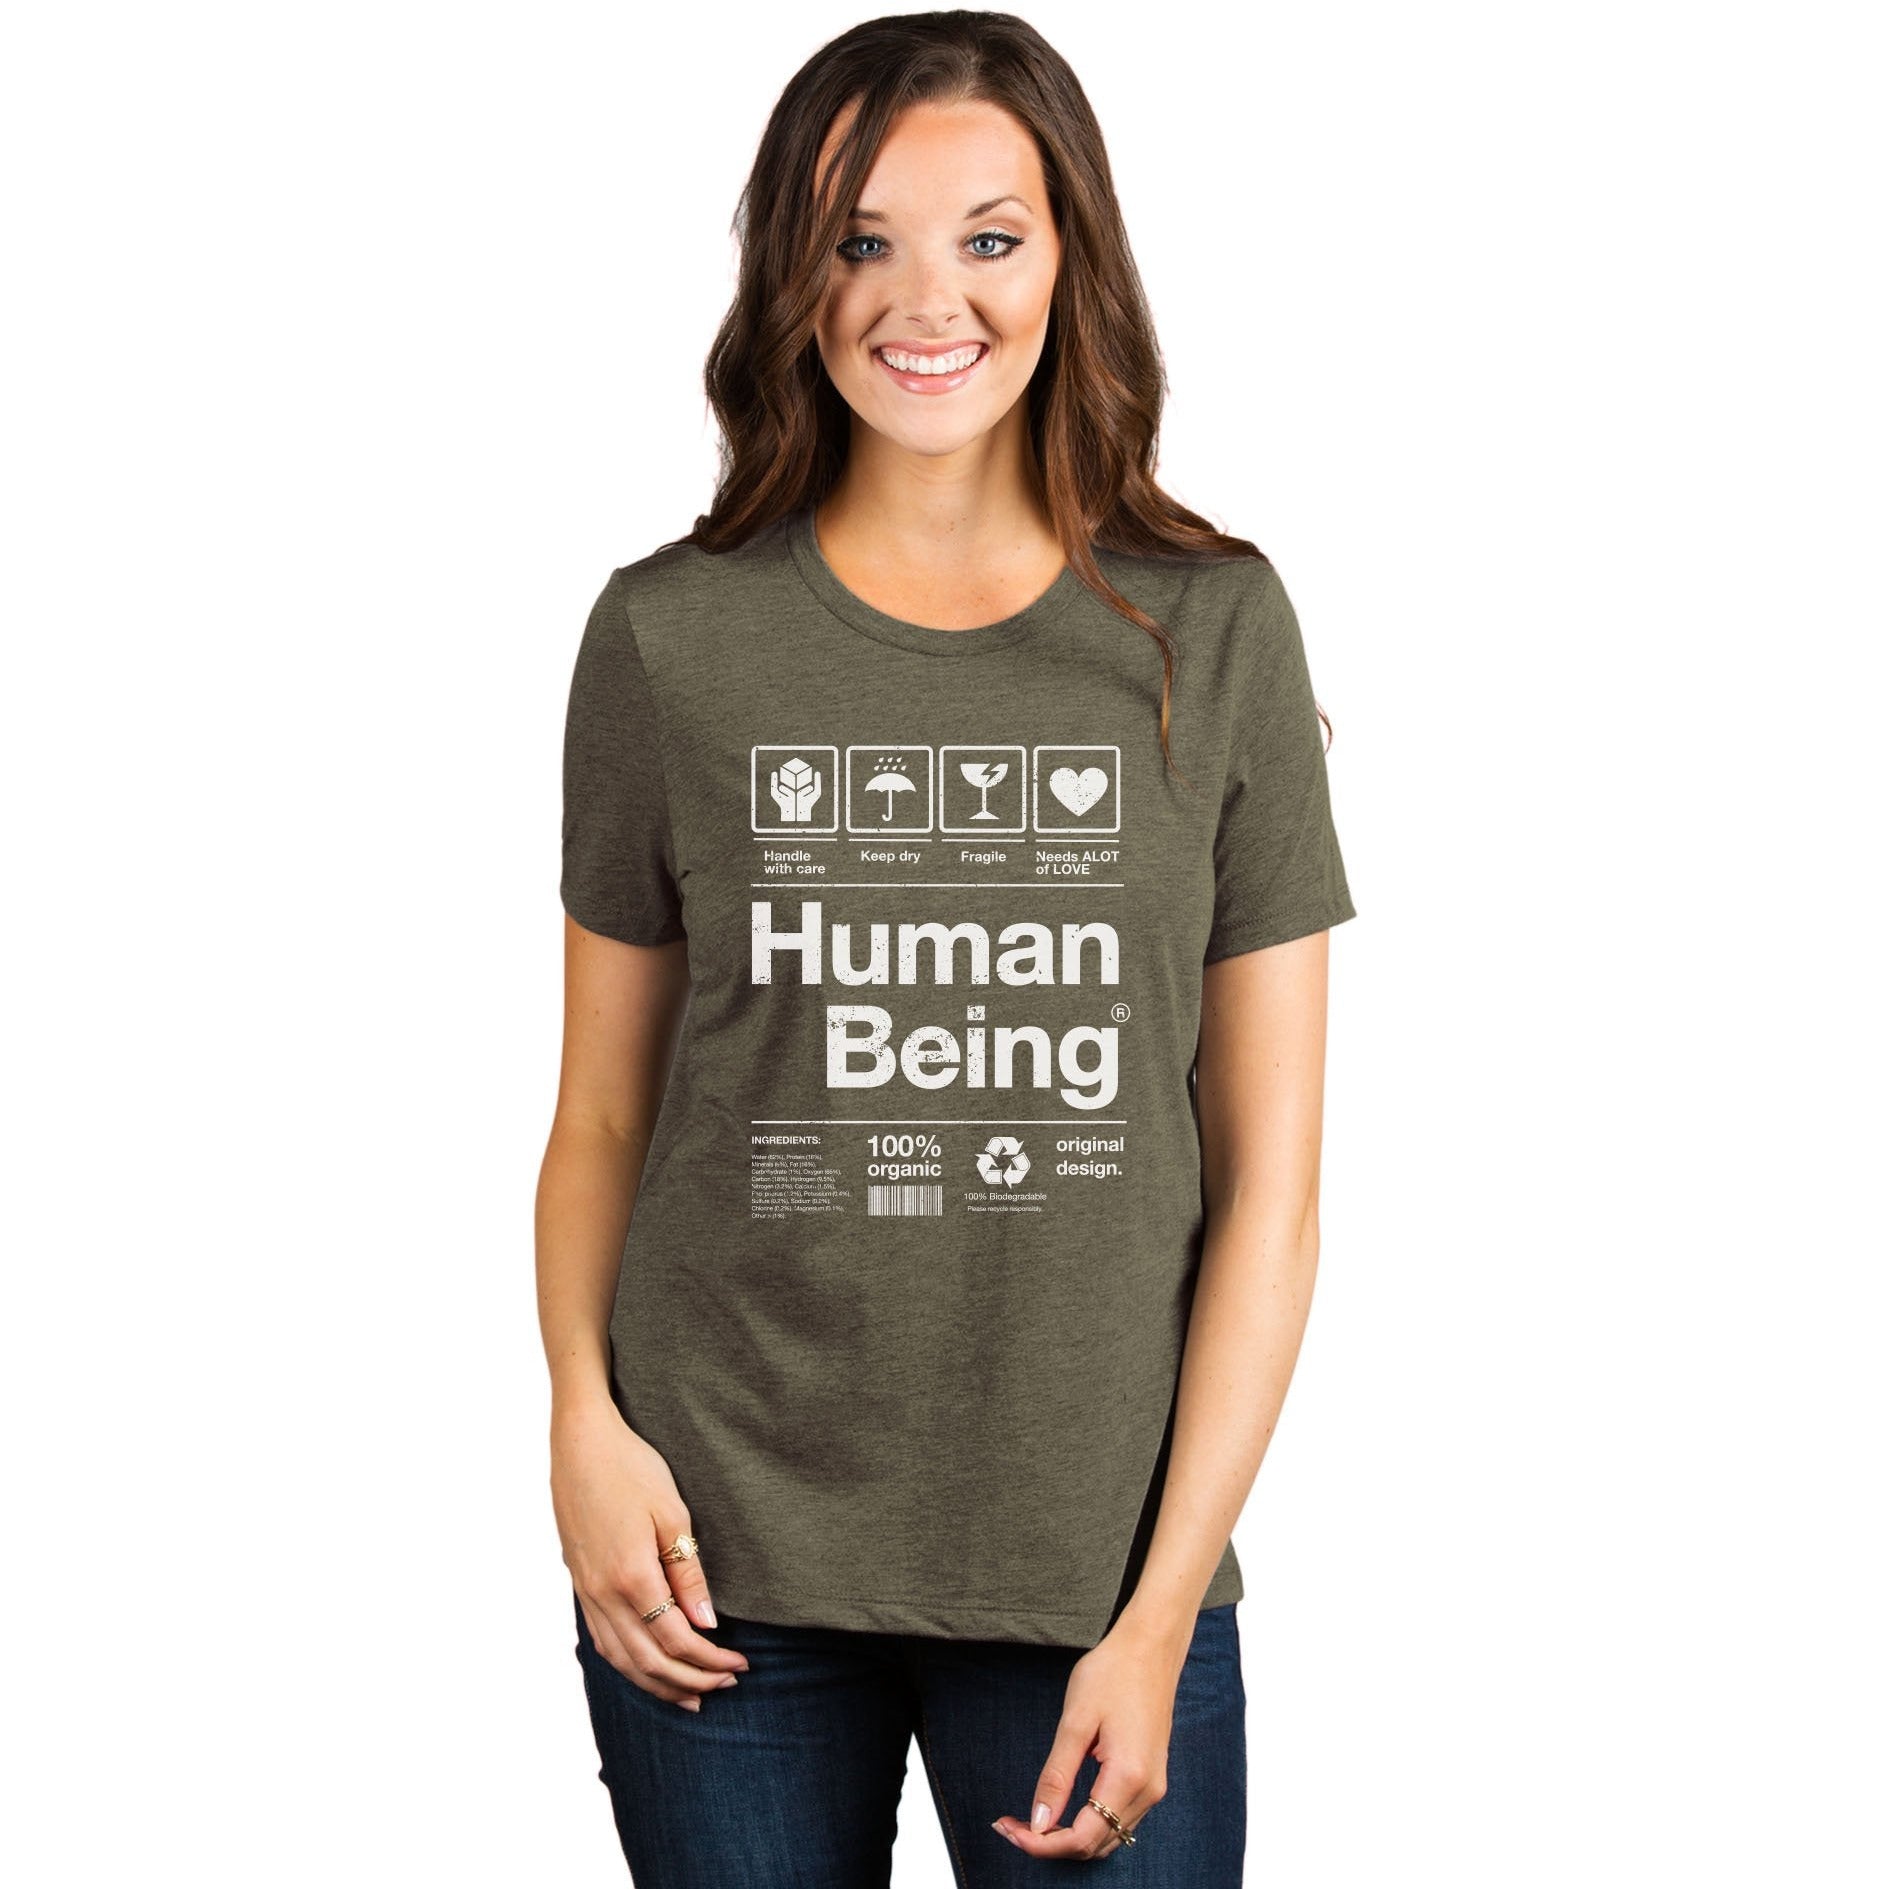 Human Being Women's Relaxed Crewneck T-Shirt Top Tee Heather Sage Model